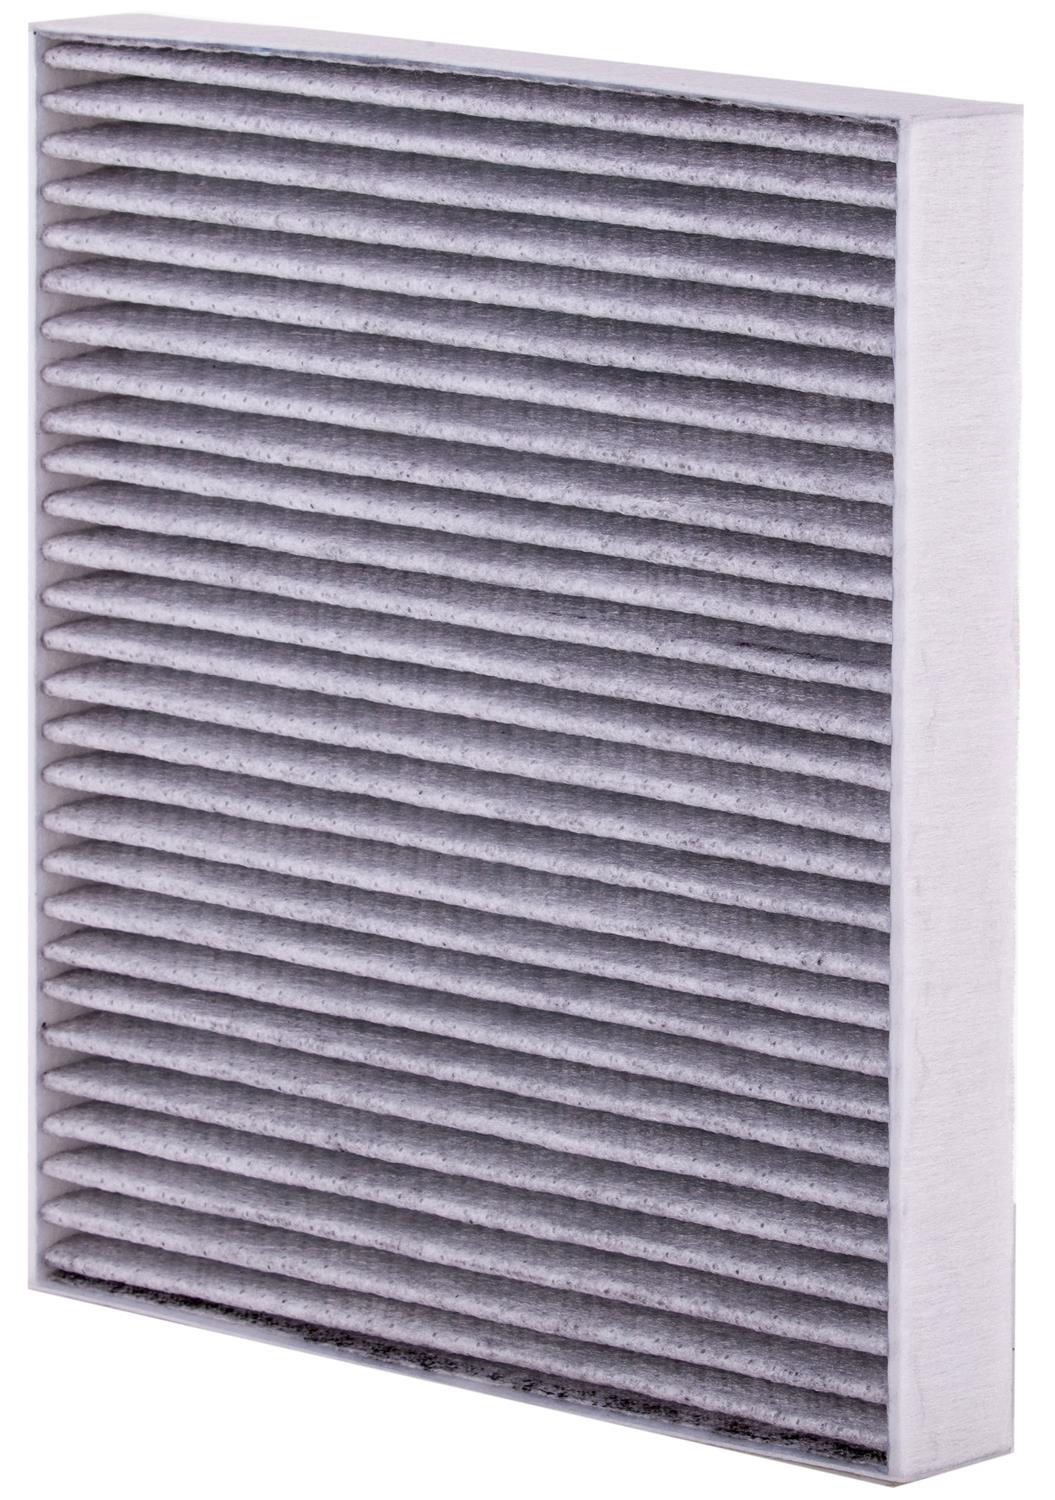 PUREFLOW 2019 Volkswagen Caddy Cabin Air Filter with Antibacterial Technology, PC99204X